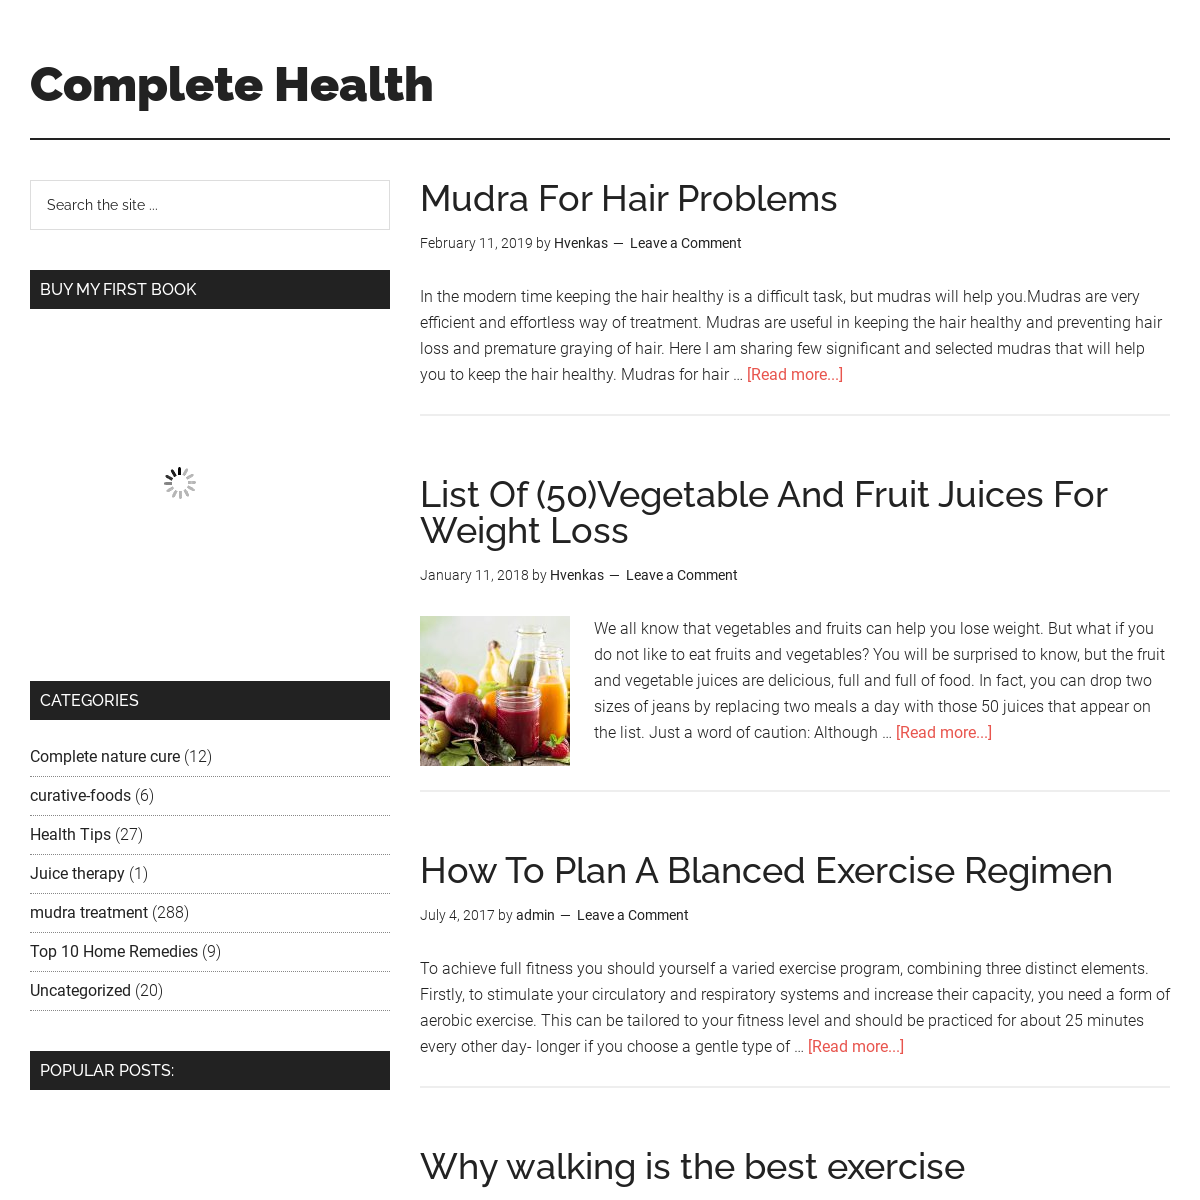 A complete backup of completehealthinfo.com